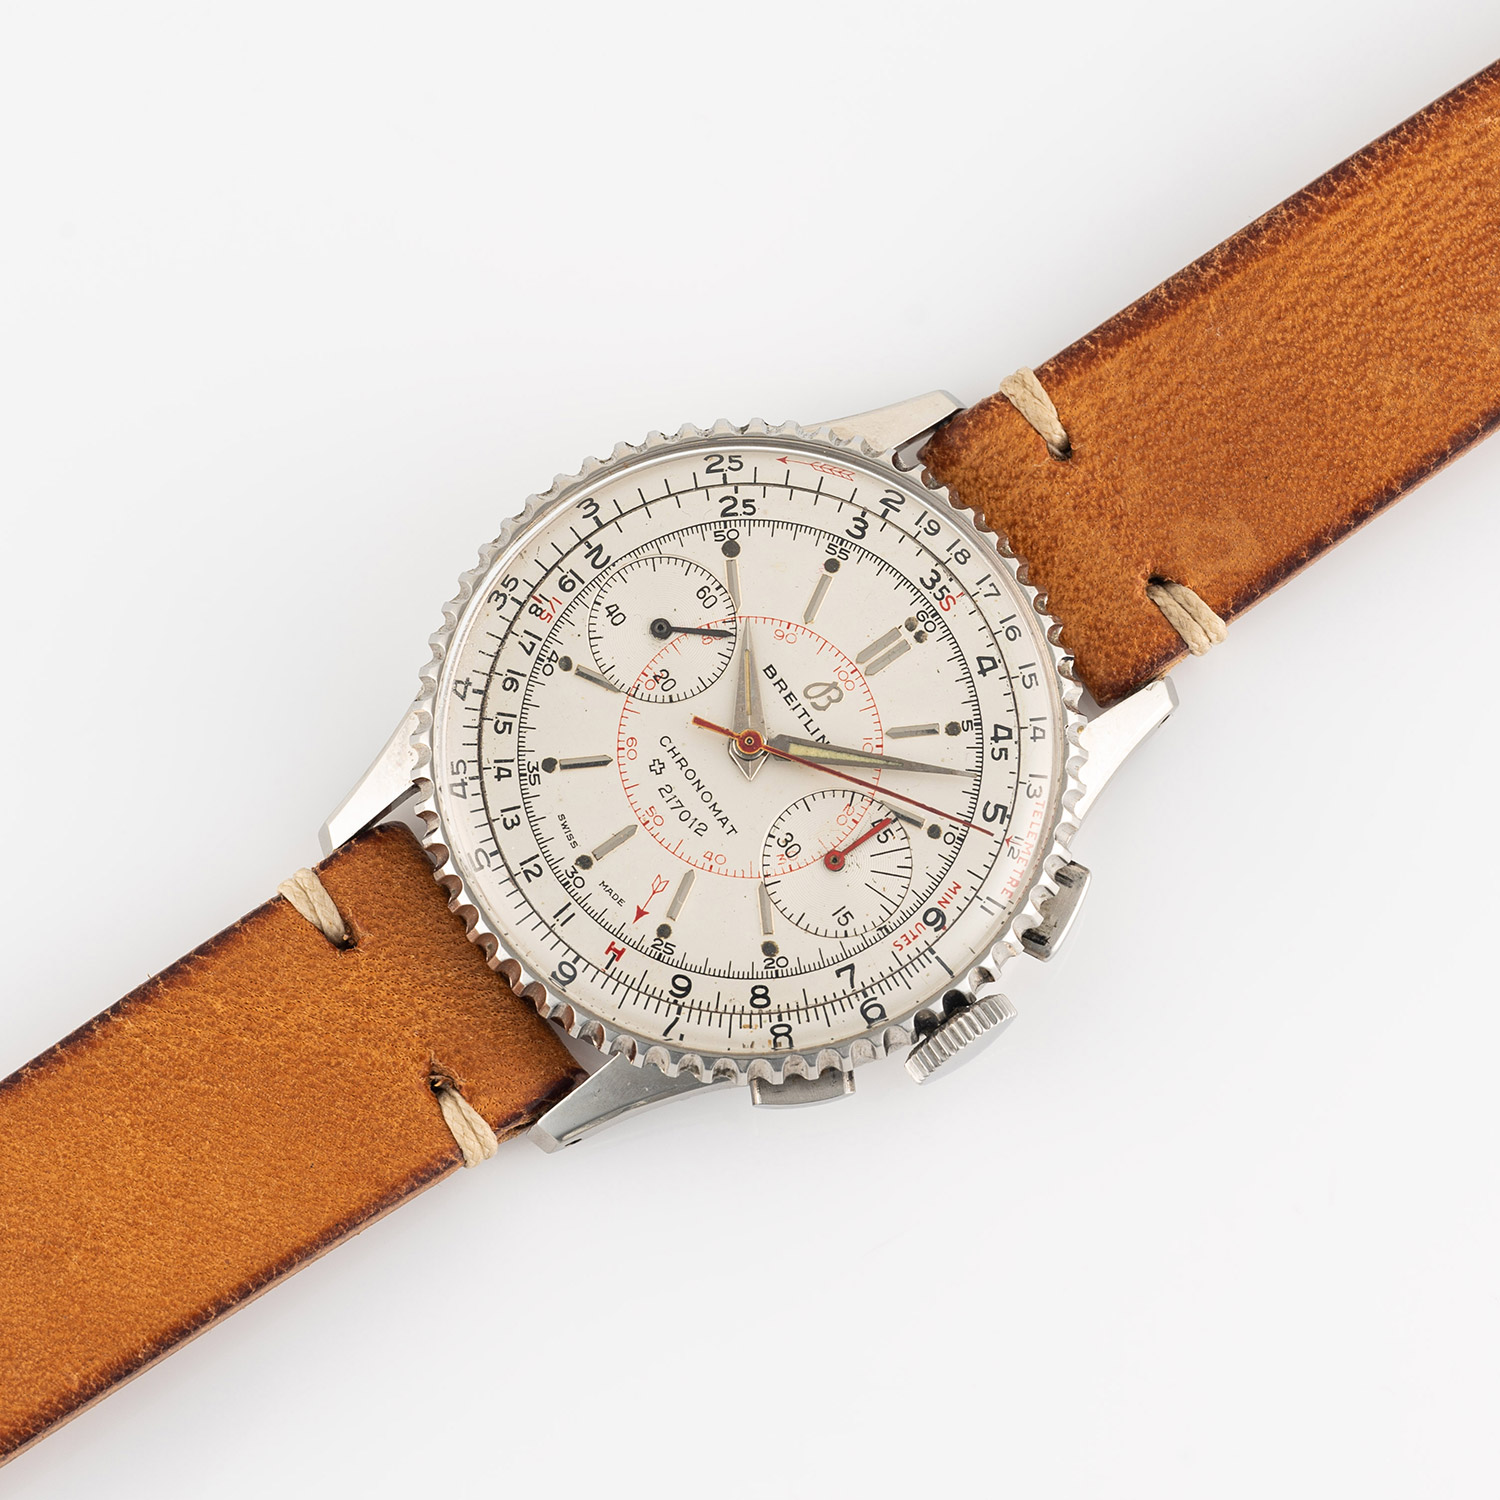 A GENTLEMAN'S SIZE STAINLESS STEEL BREITLING CHRONOMAT CHRONOGRAPH WRIST WATCH CIRCA 1945, REF. - Image 4 of 8